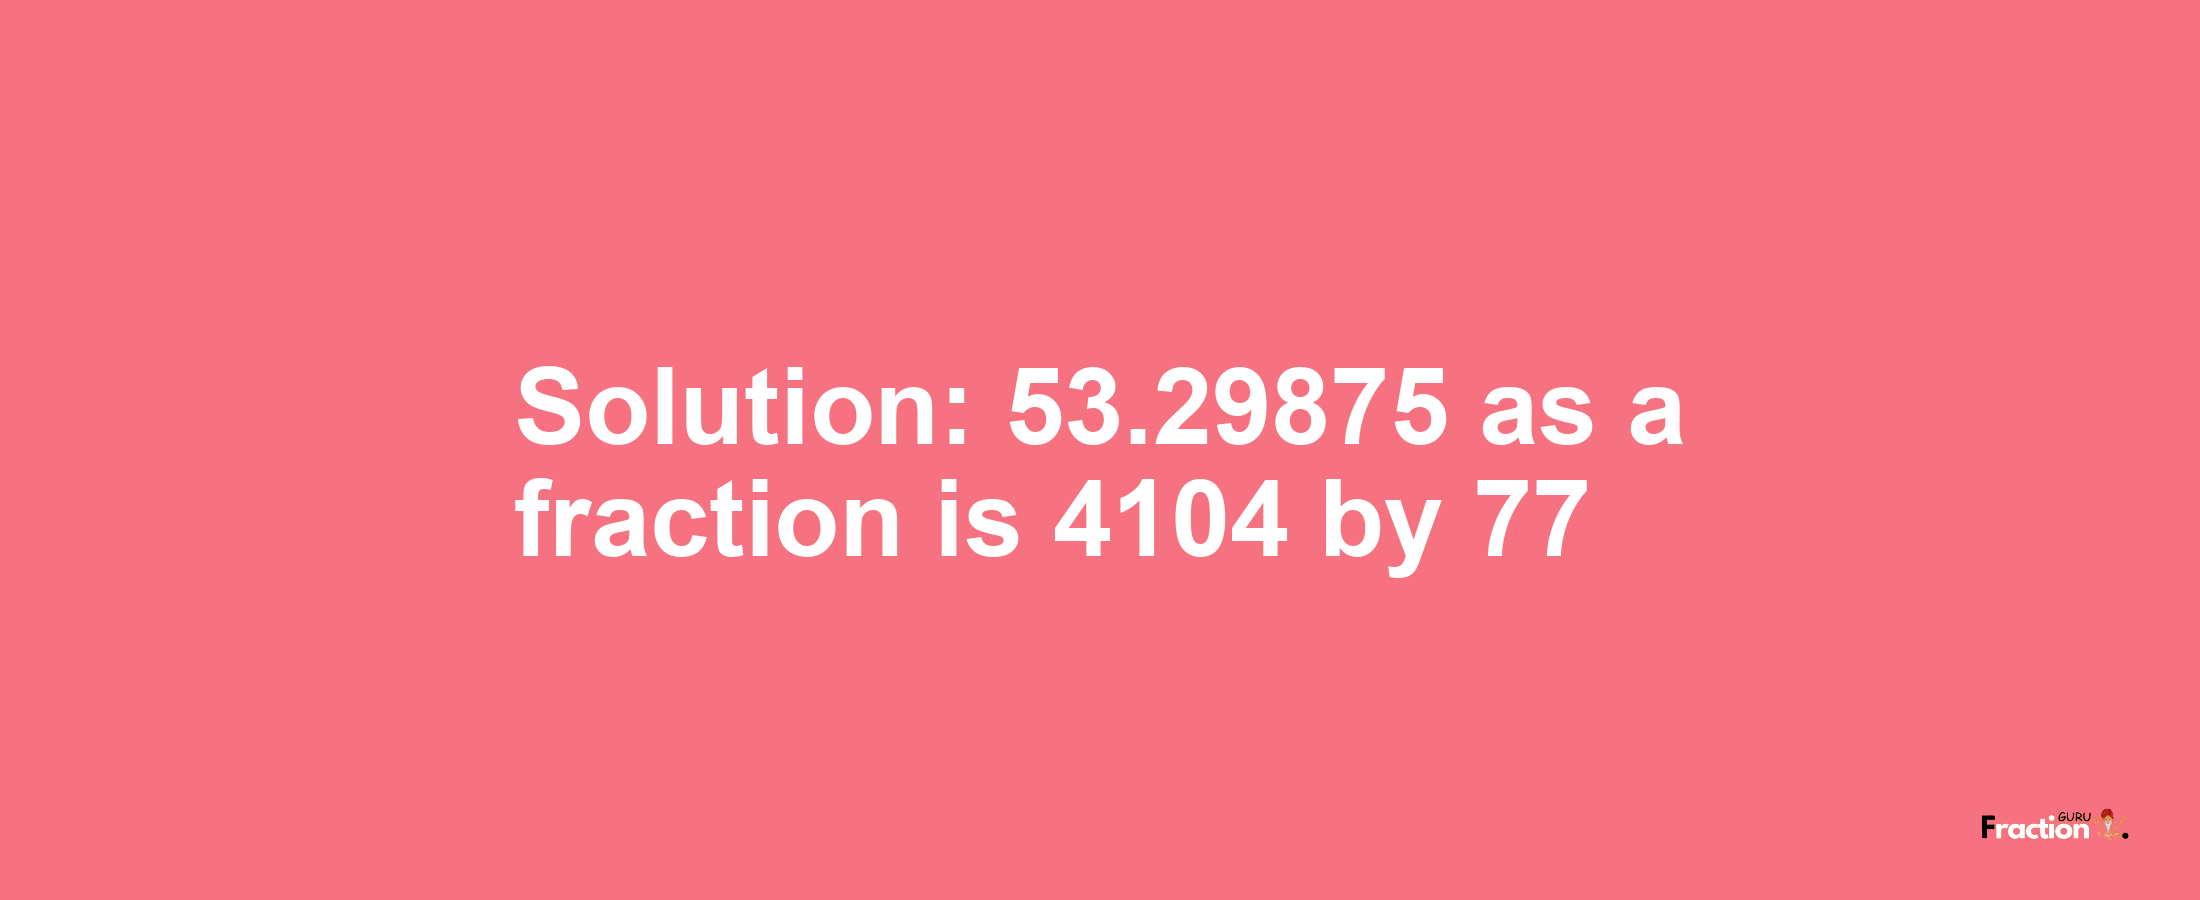 Solution:53.29875 as a fraction is 4104/77